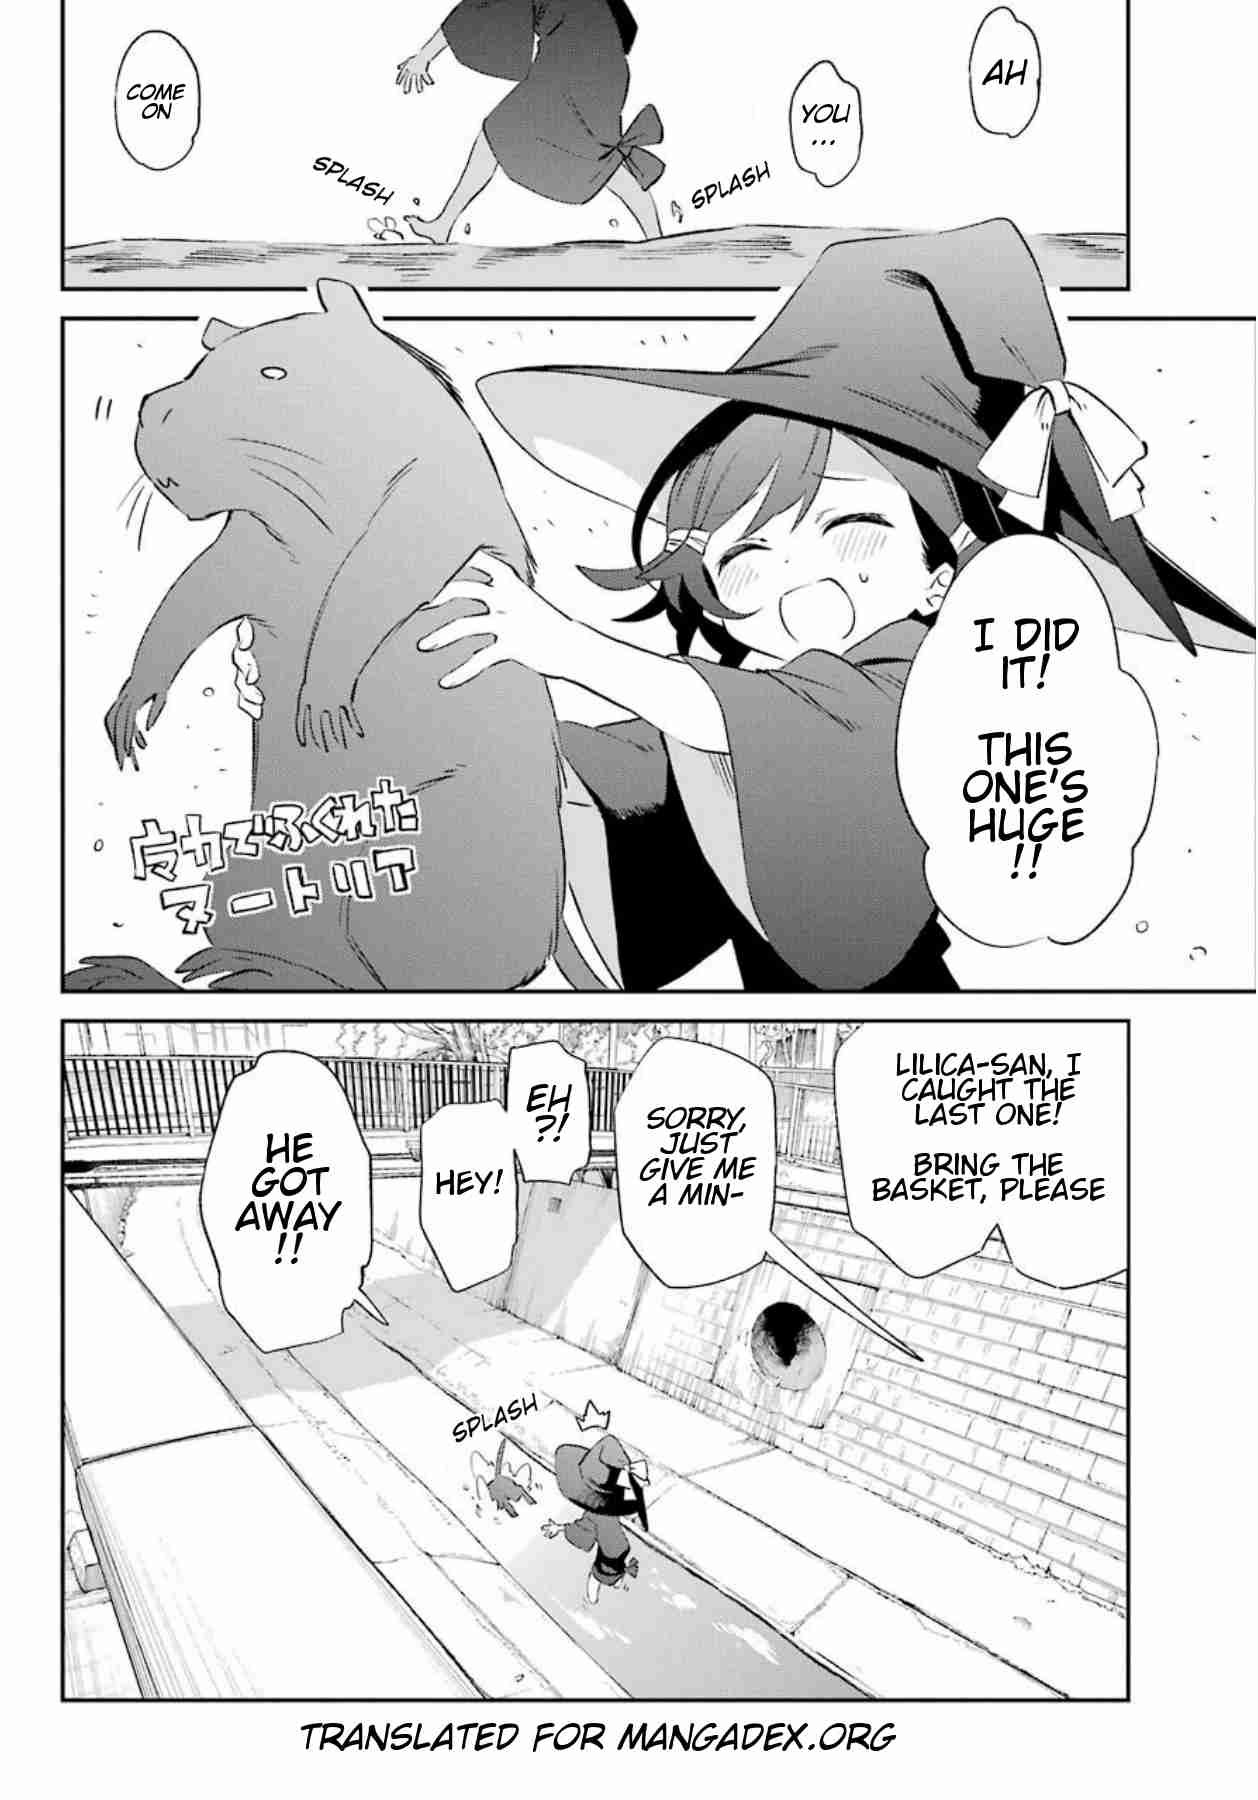 A Witch's Life in a Six Tatami Room Vol. 1 Ch. 1